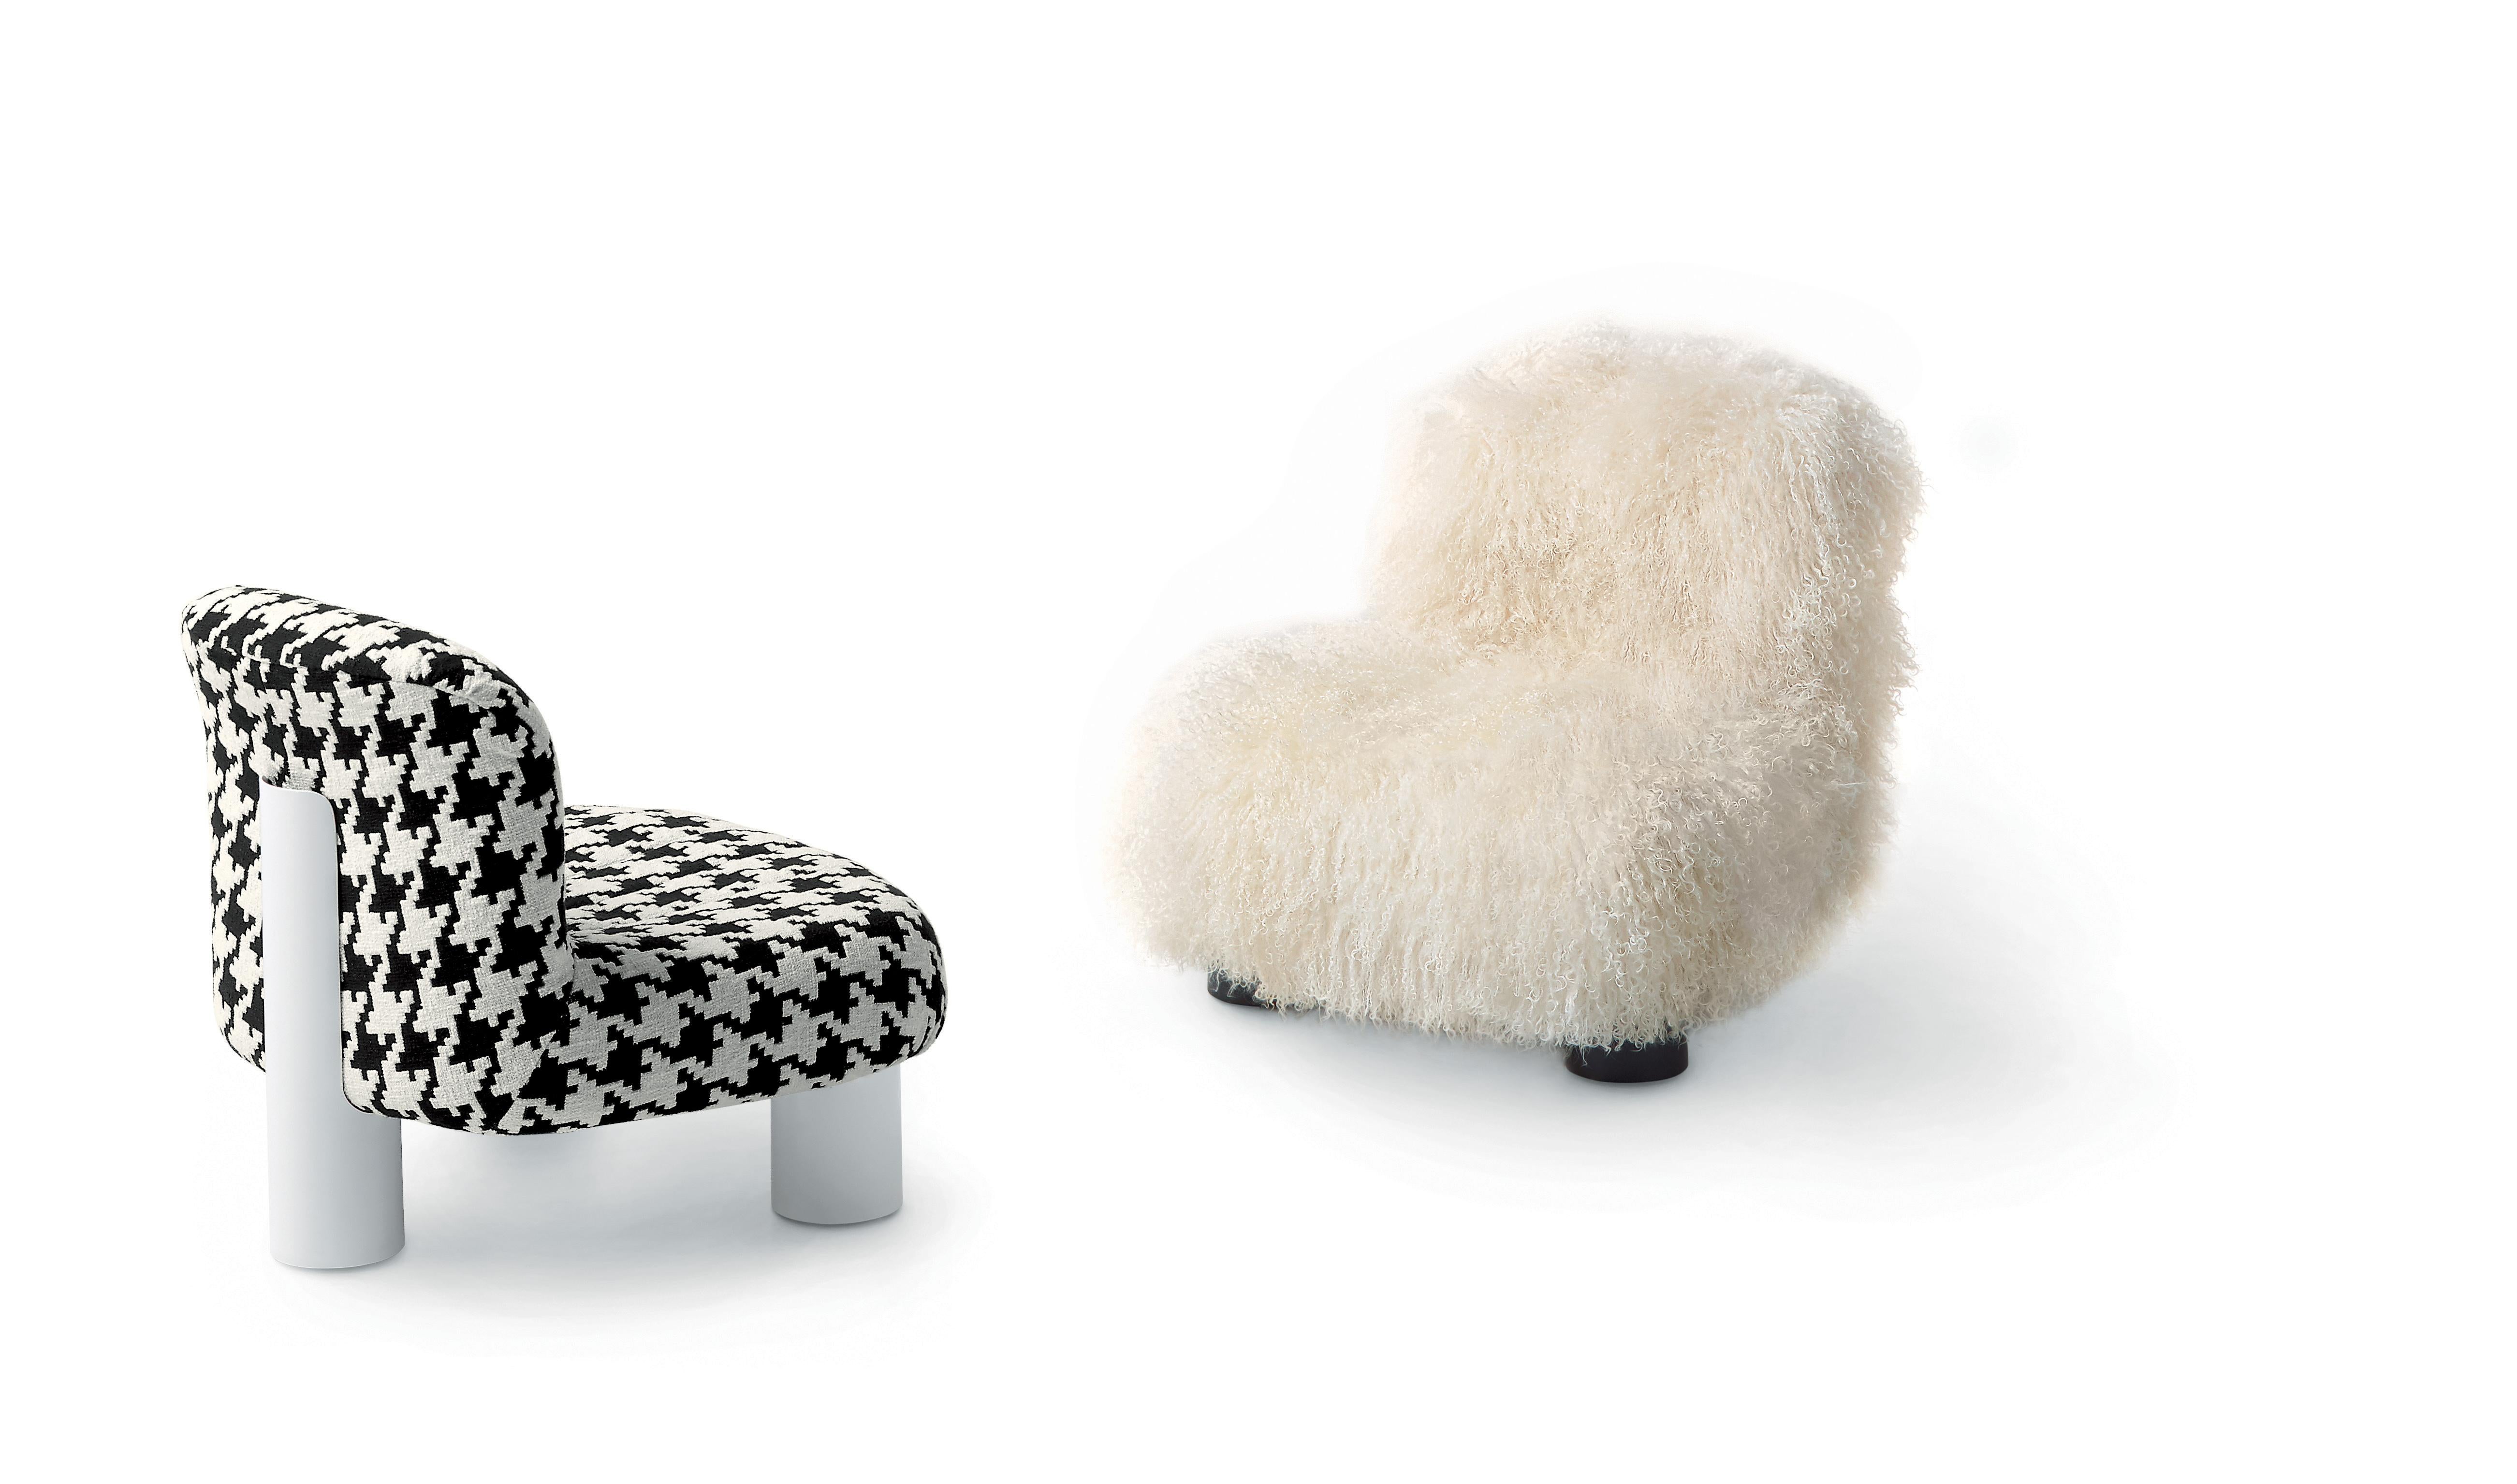 An innovative upholstered rolling chair with three large tubular legs. Botolo is an ideal place to sit, relax and be creative.Cini Boeri designed Botolo in 1973, giving life to a new design style, where you could choose the height of the legs to